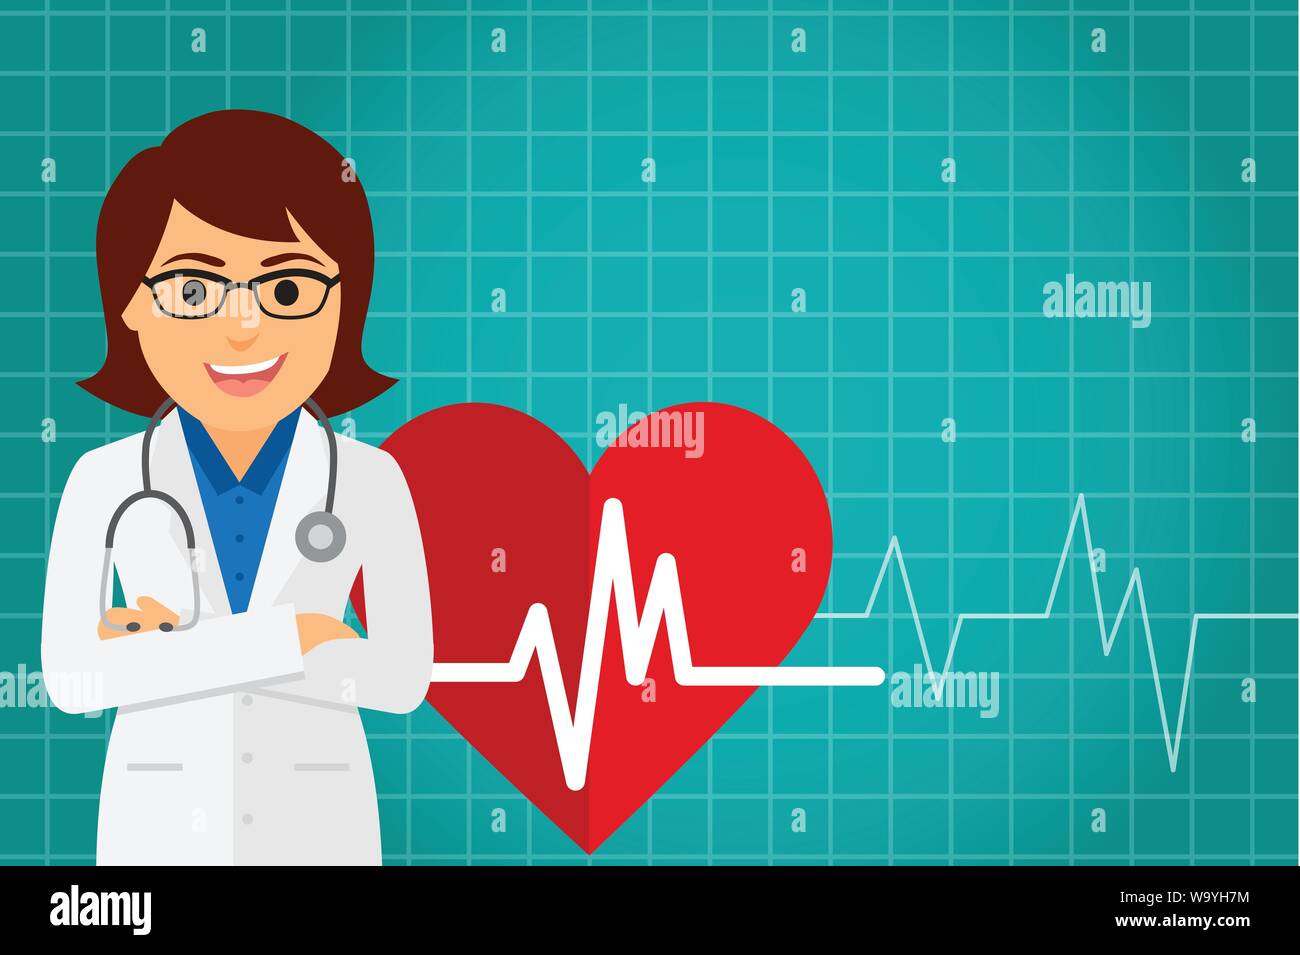 Doctor occupation character health care with heart. Vector illustration Stock Vector